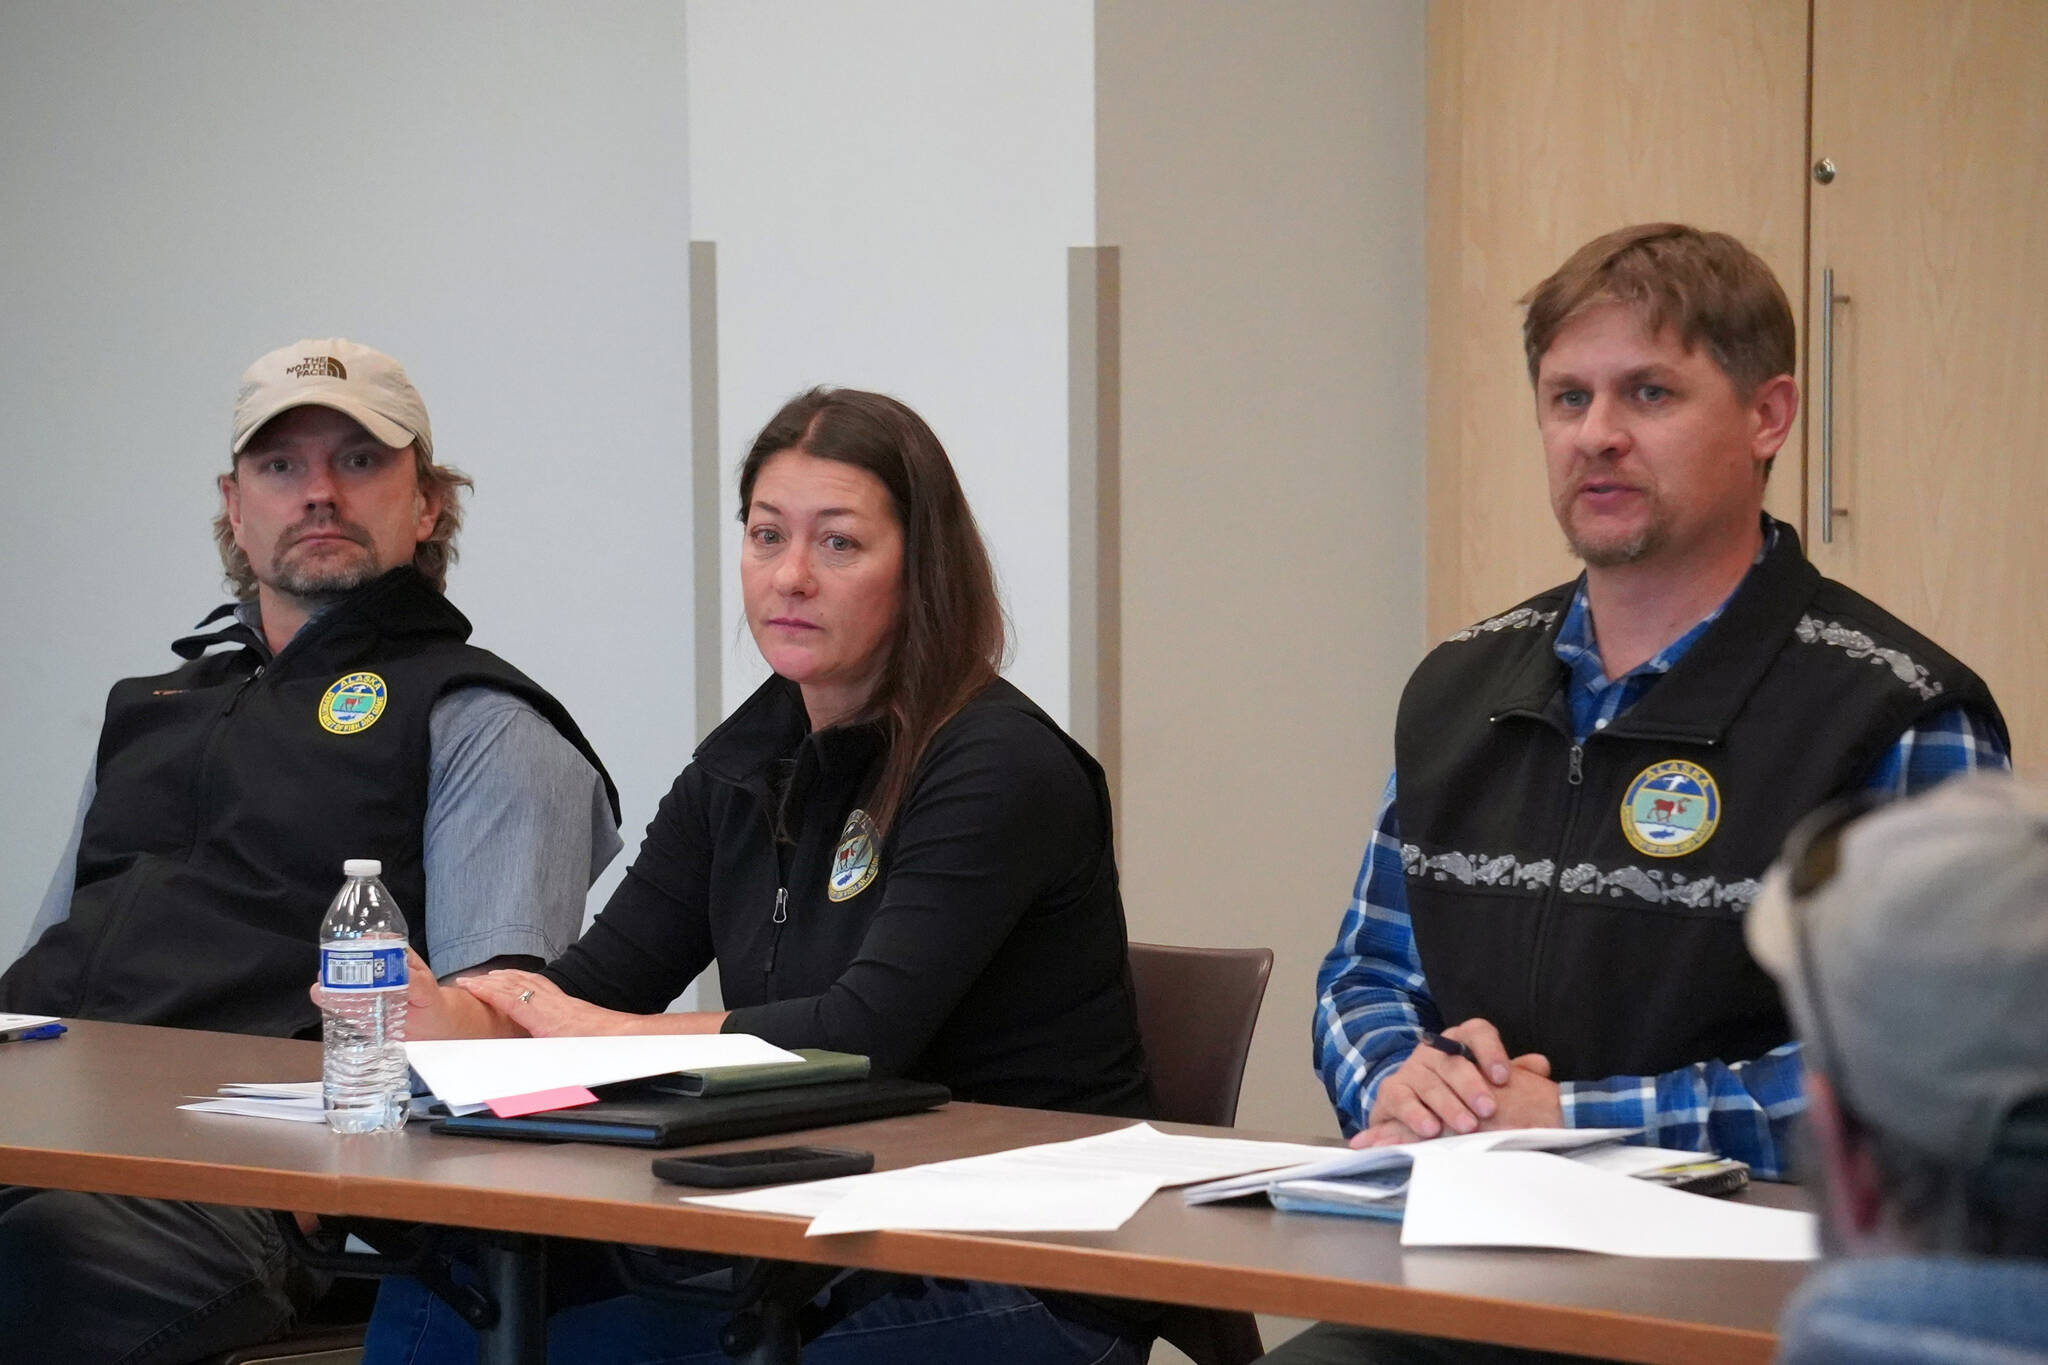 Tony Eskelin, Jenny Gates and Israel Payton listen to questions at a “Town Hall Style Meeting” held at Soldotna Public Library in Soldotna, Alaska, on Thursday, Oct. 26, 2023. (Jake Dye/Peninsula Clarion)